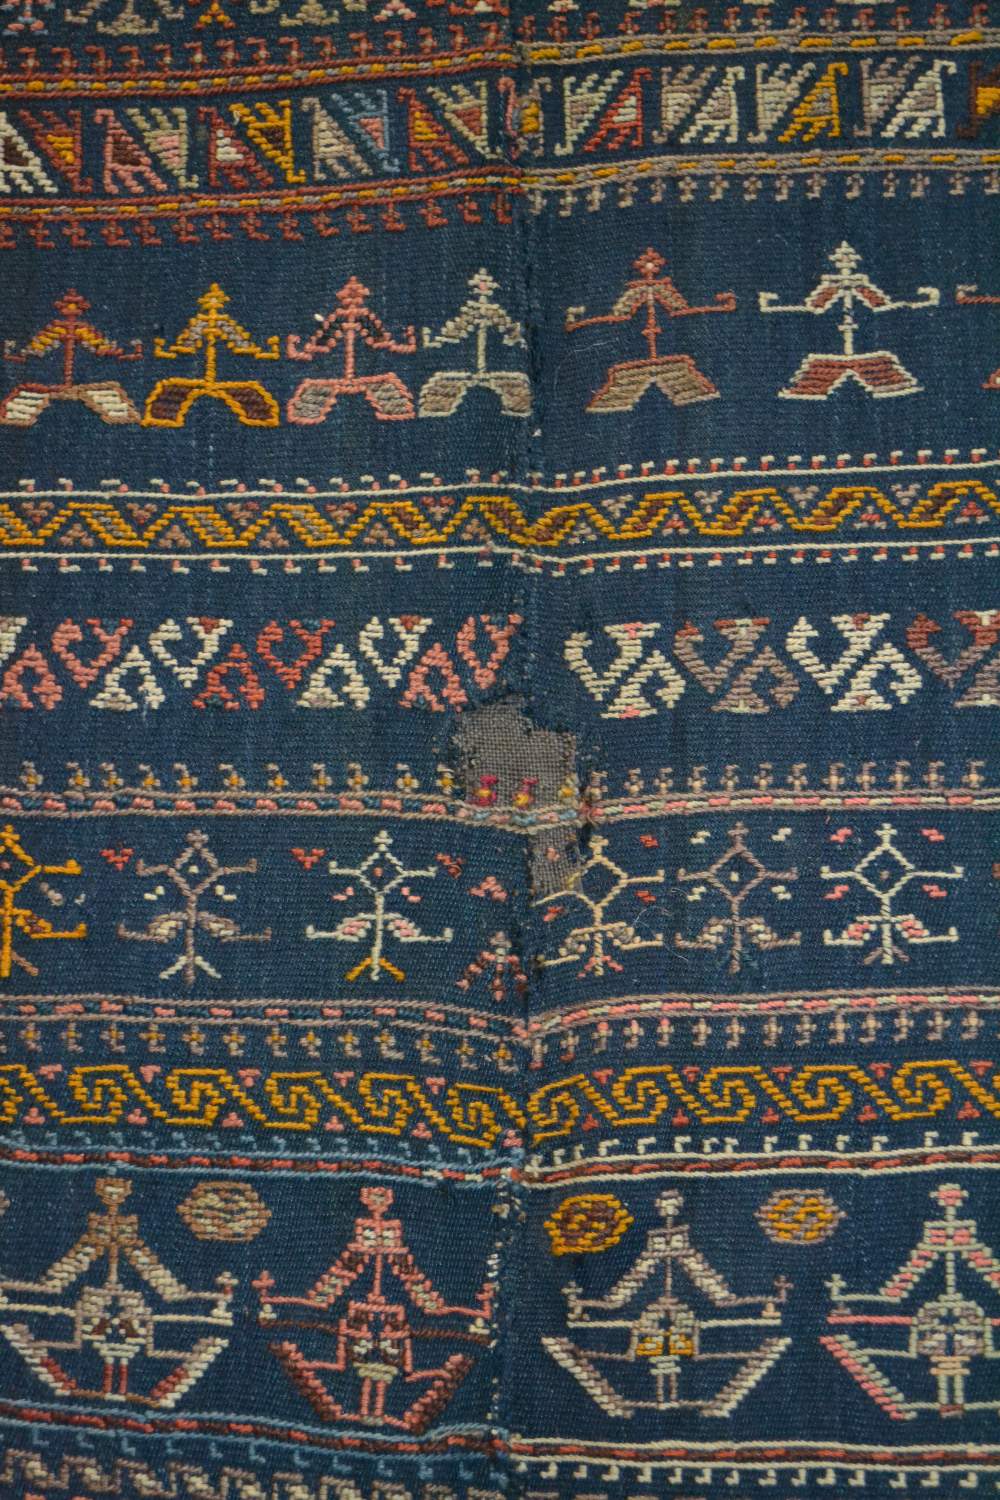 Qashqa’i horse cover, warp-faced plainweave ground with weft wrapping, Fars, south west Persia, - Image 4 of 8